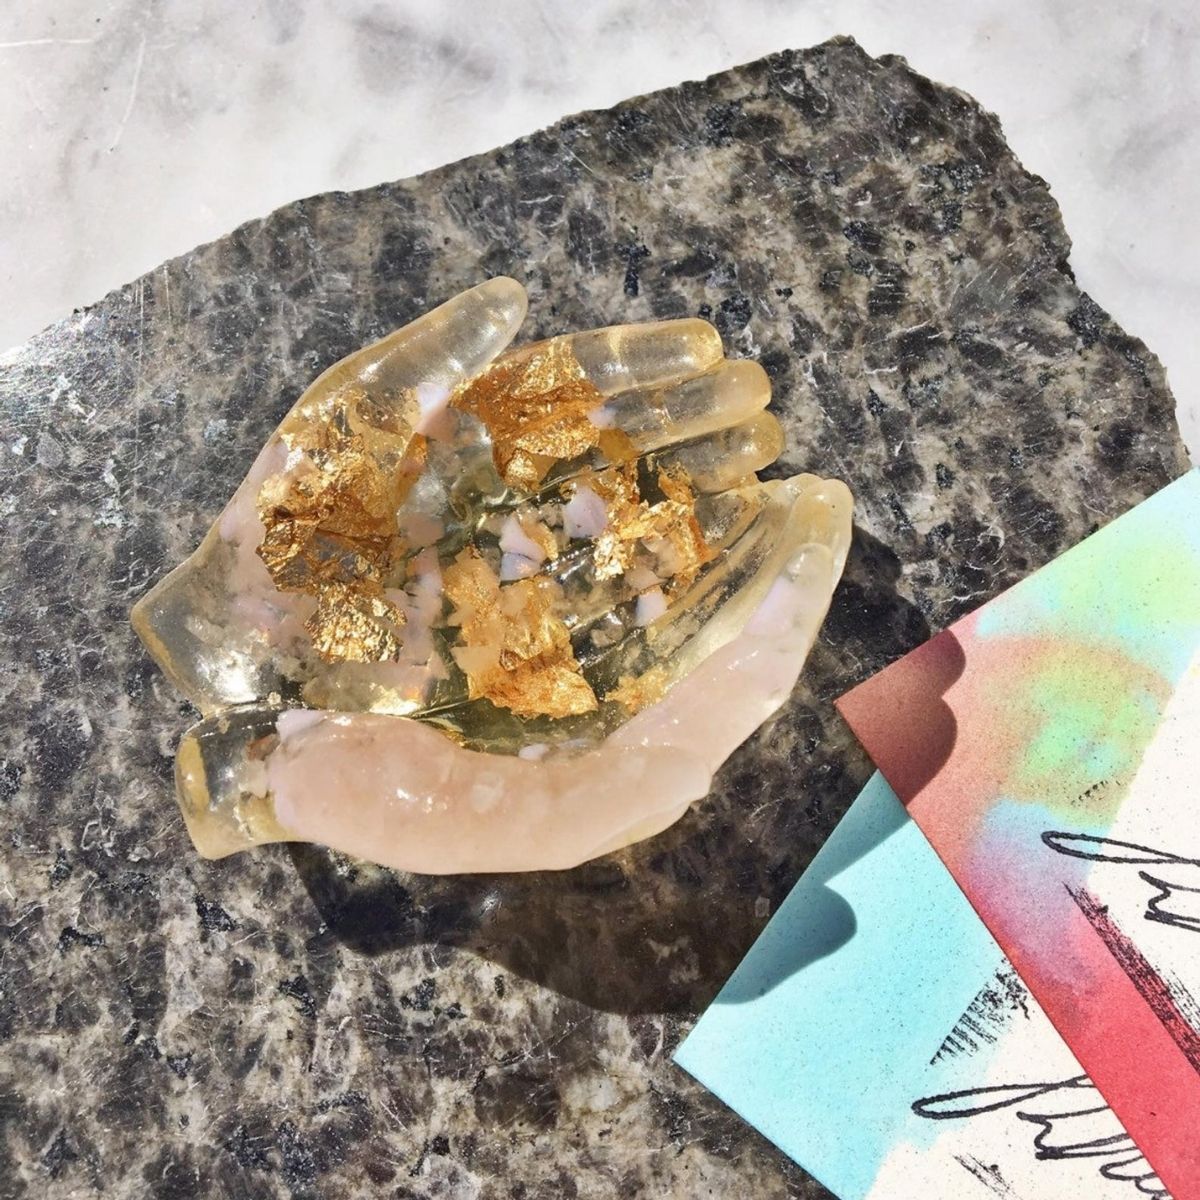 The Best Hostess Gifts Option: Resin Rose Quartz and Gold Leaf Crystal Catchall